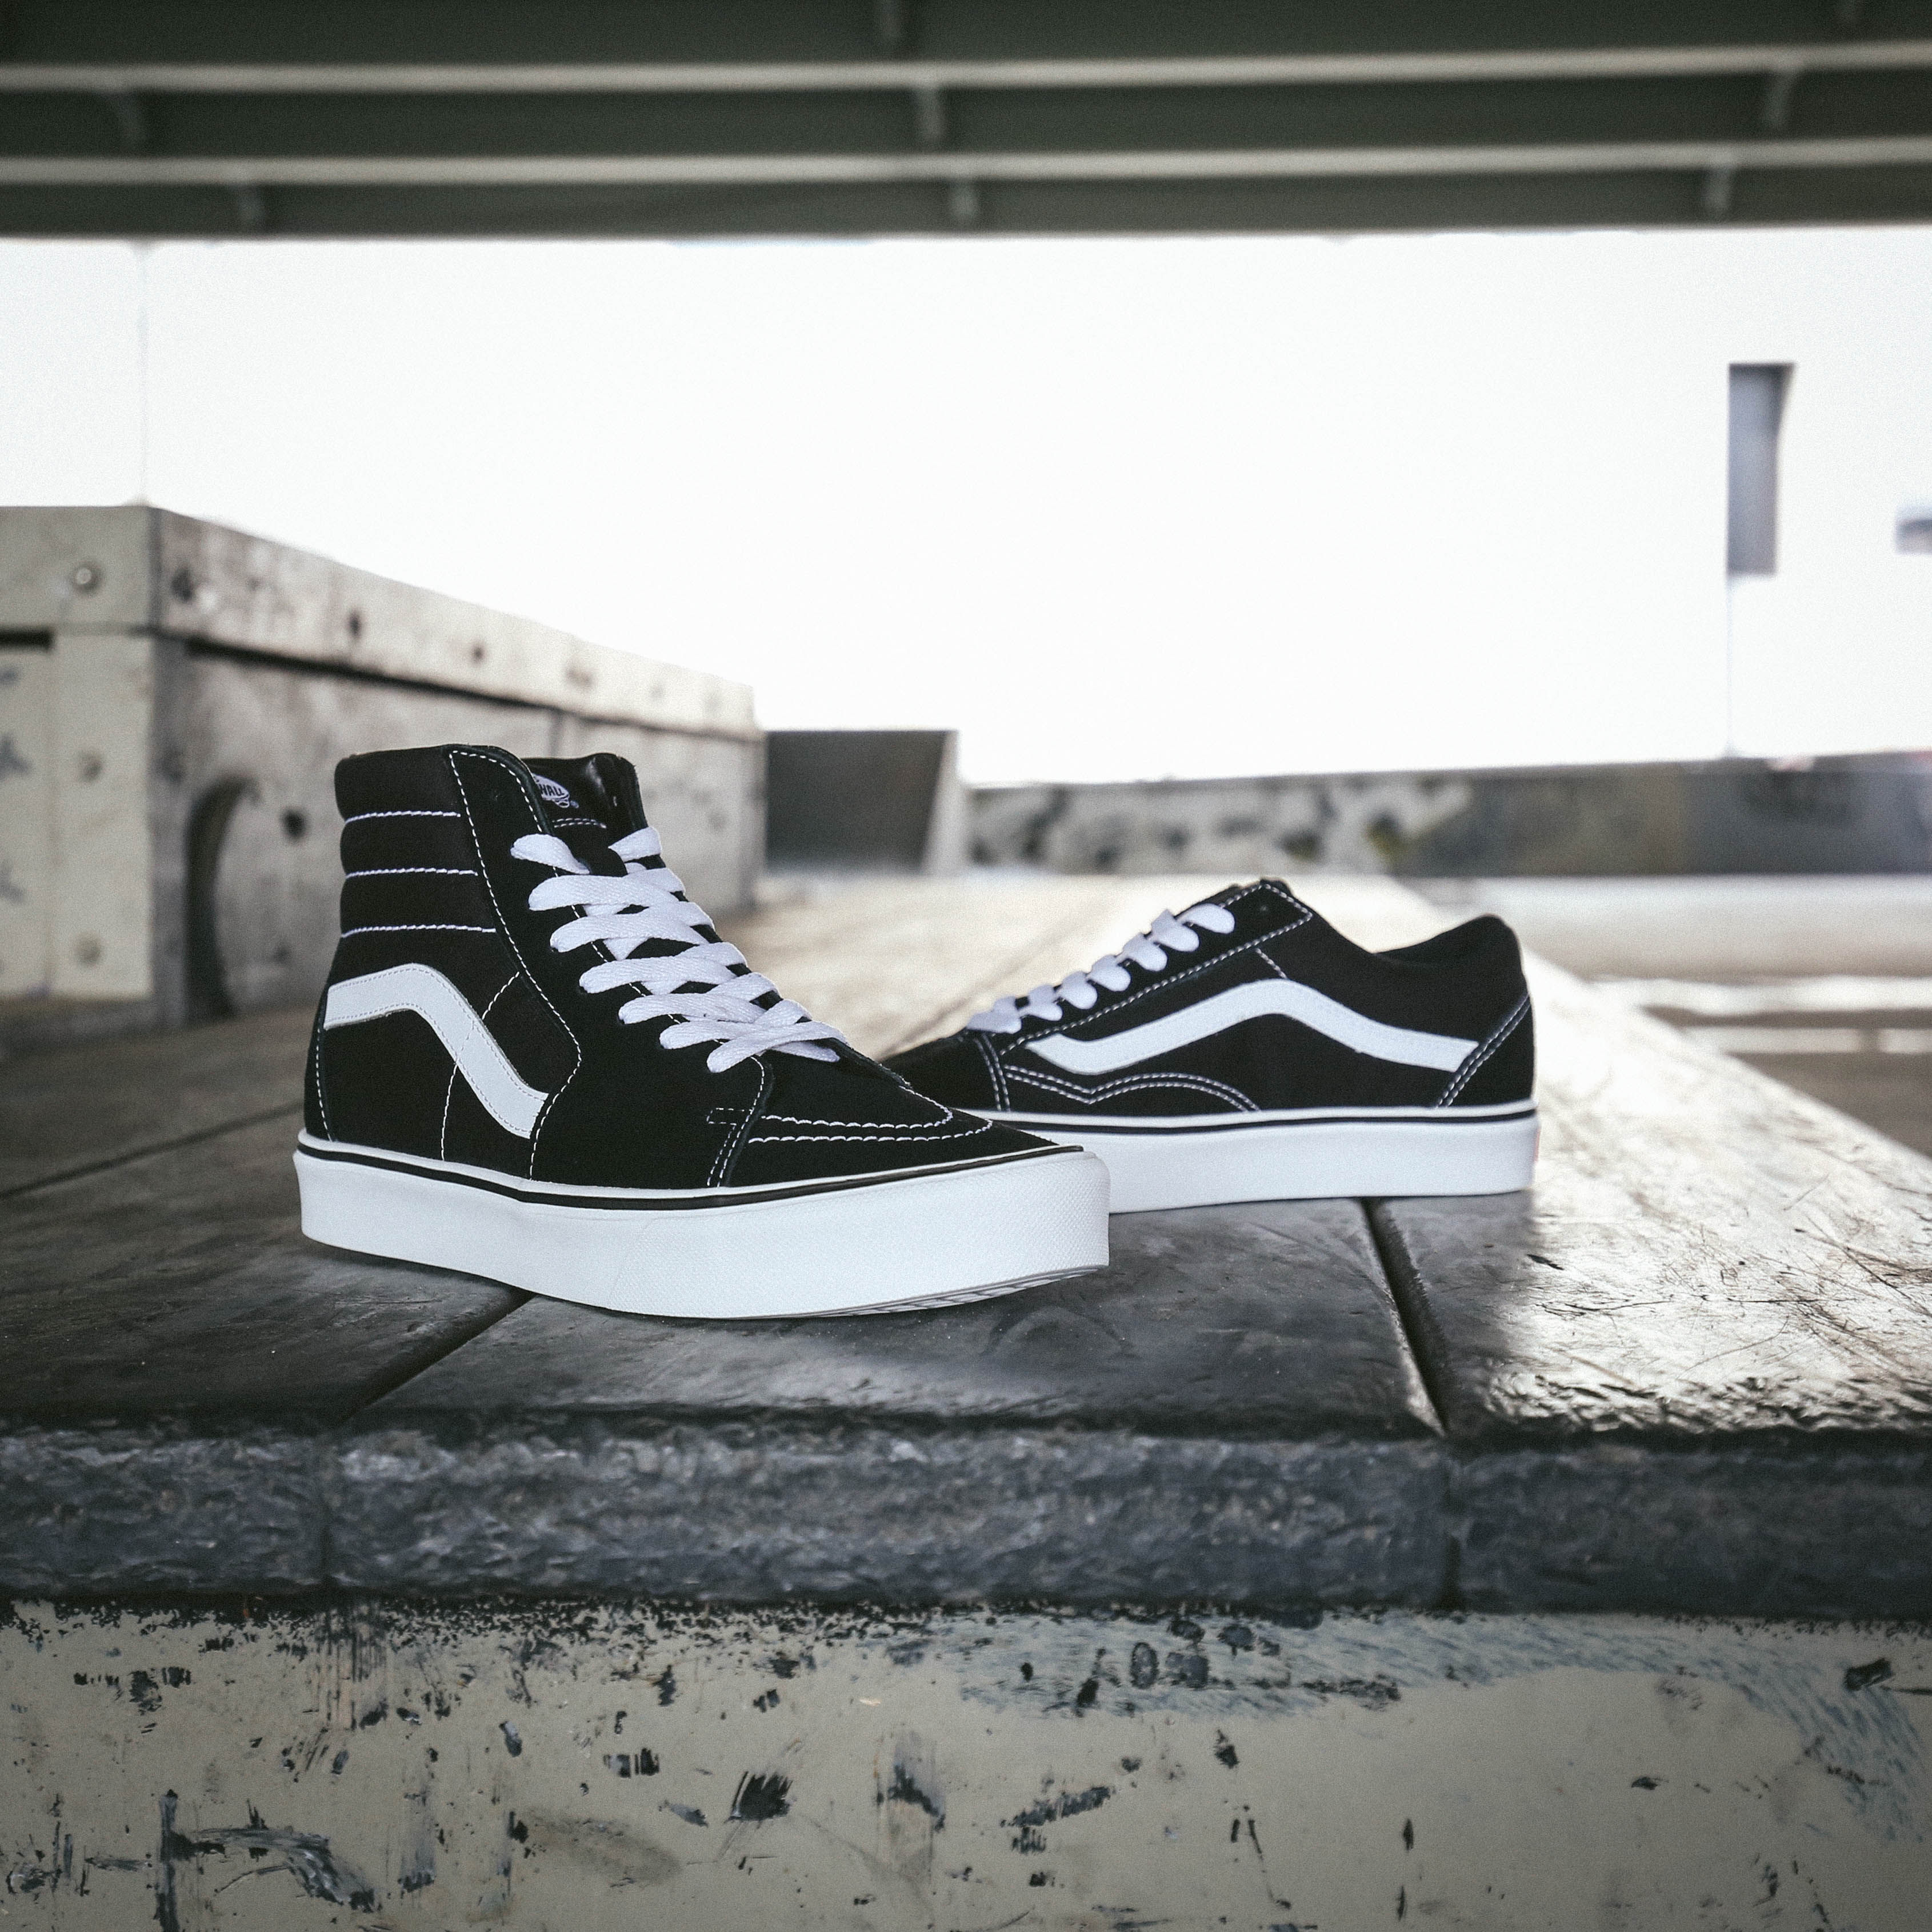 Foot Locker Canada on Twitter: "The "Sk8- Hi Lite" and "Old Skool" is available at select Foot Locker stores. https://t.co/FpKq7hmm0m" / Twitter